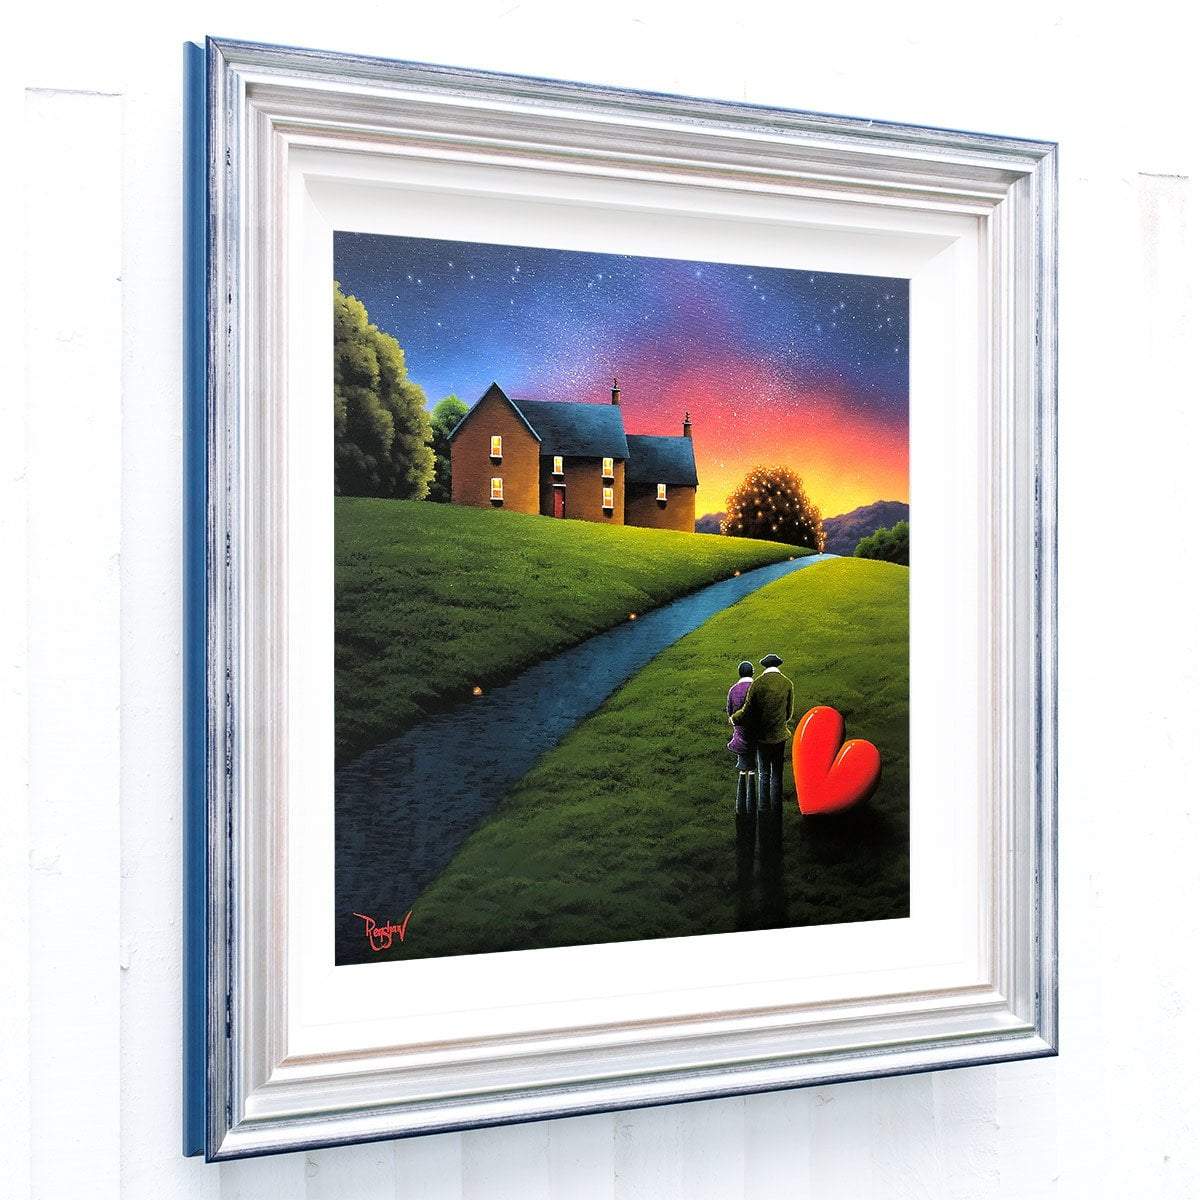 Besotted by You - Original David Renshaw Framed